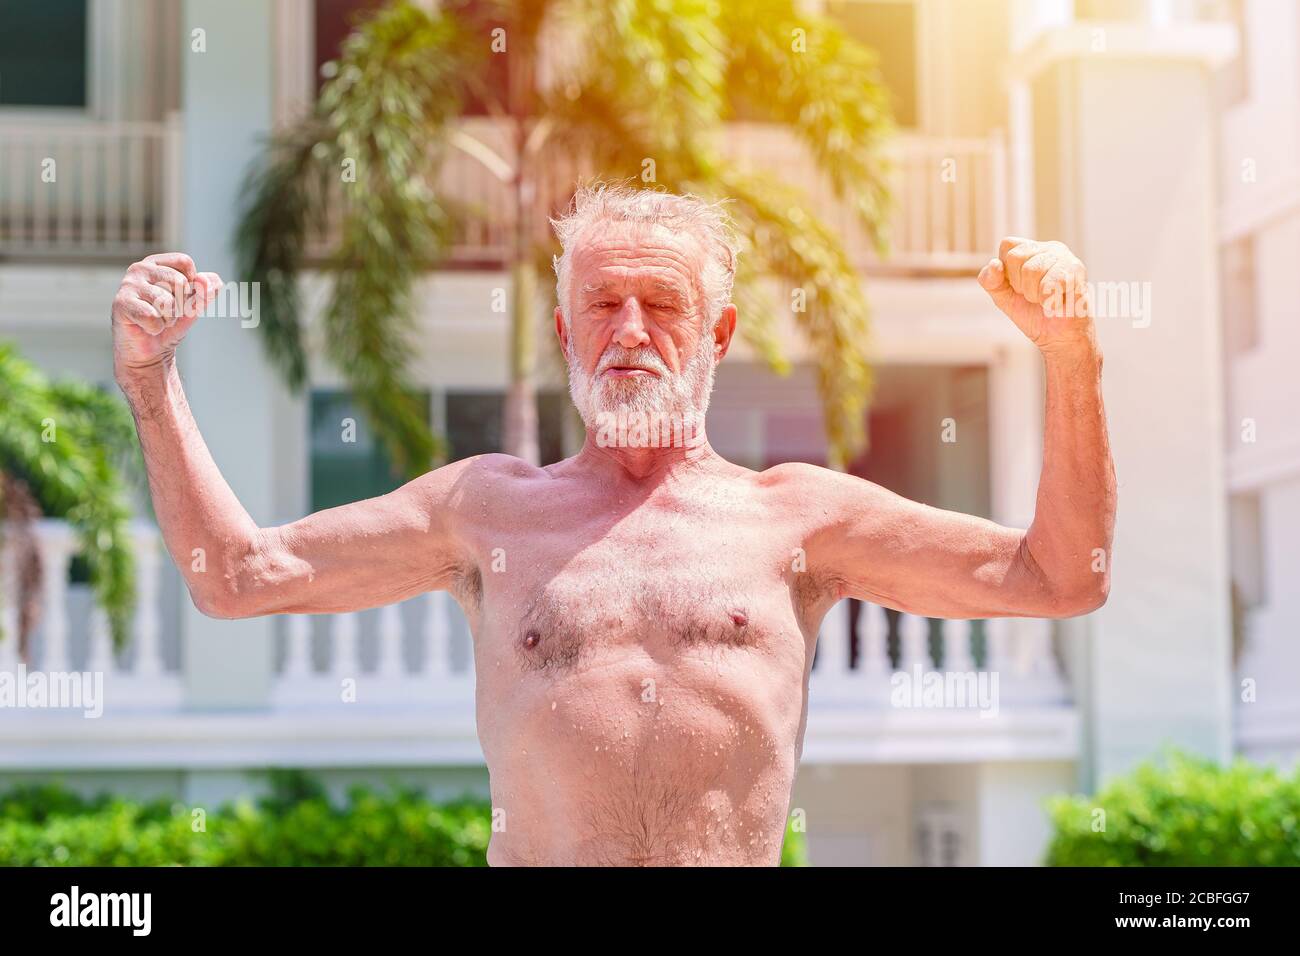 Strong healthy elder man show muscle and fit expression outdoor Stock Photo